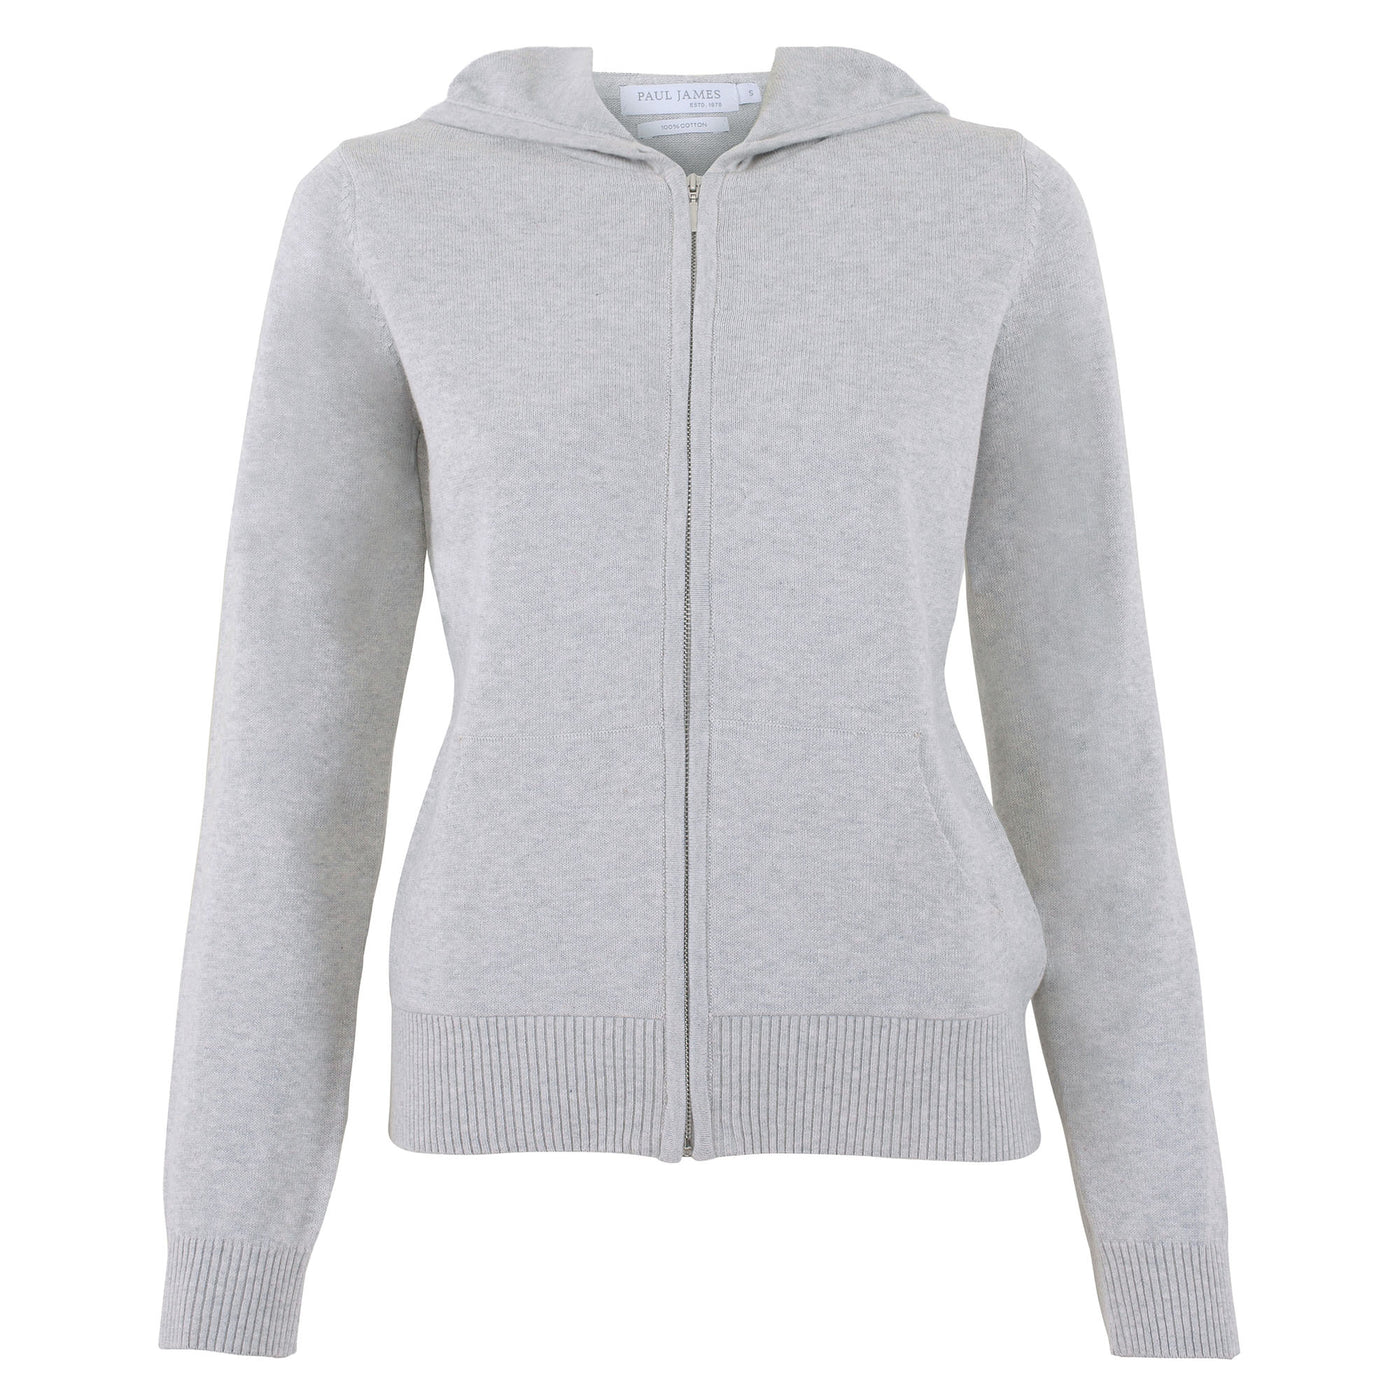 grey womens zip up hooded sweater